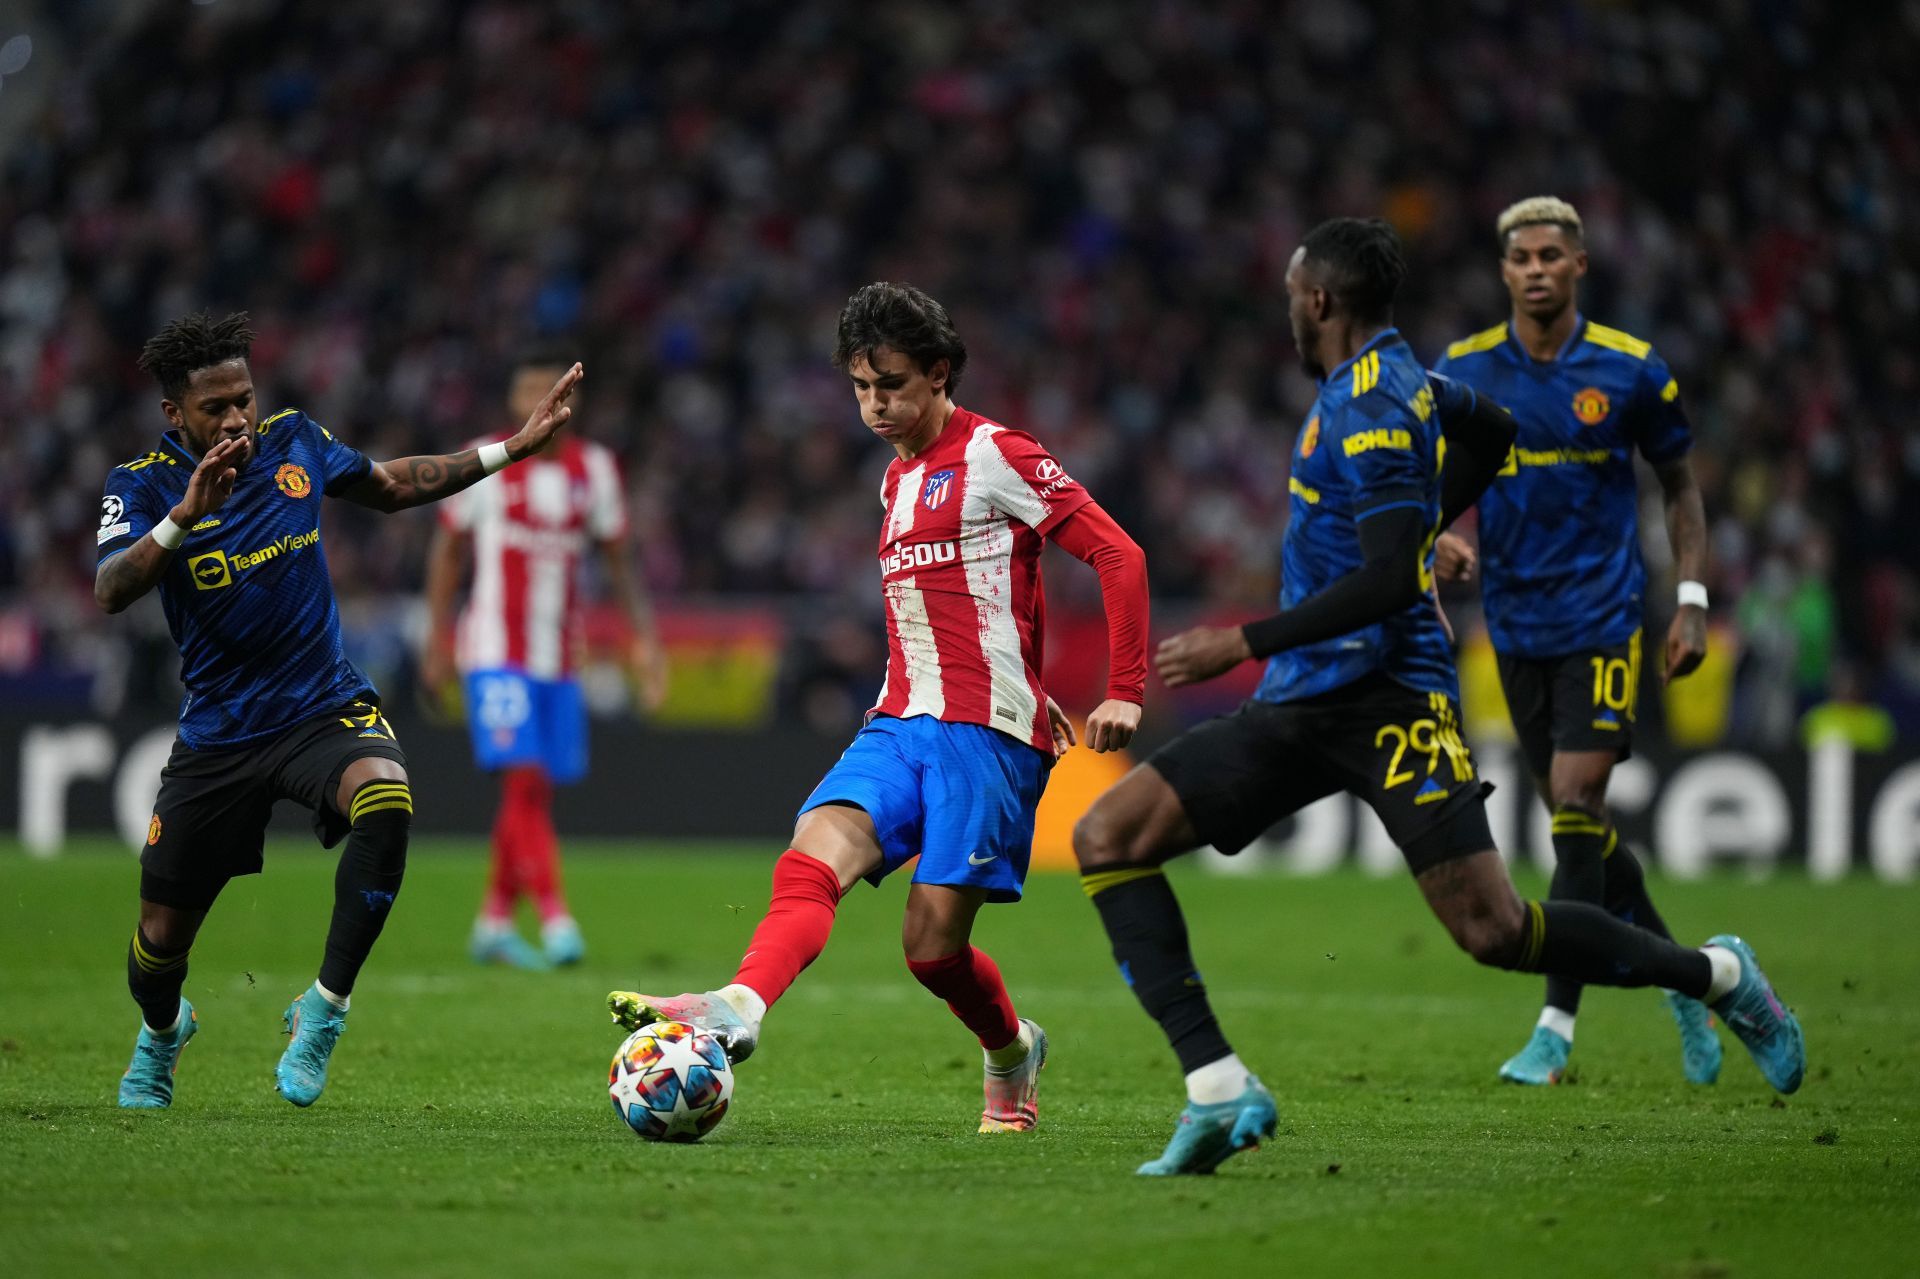 Atletico Madrid and Manchester United played out a 1-1 draw in the UEFA Champions League last night.